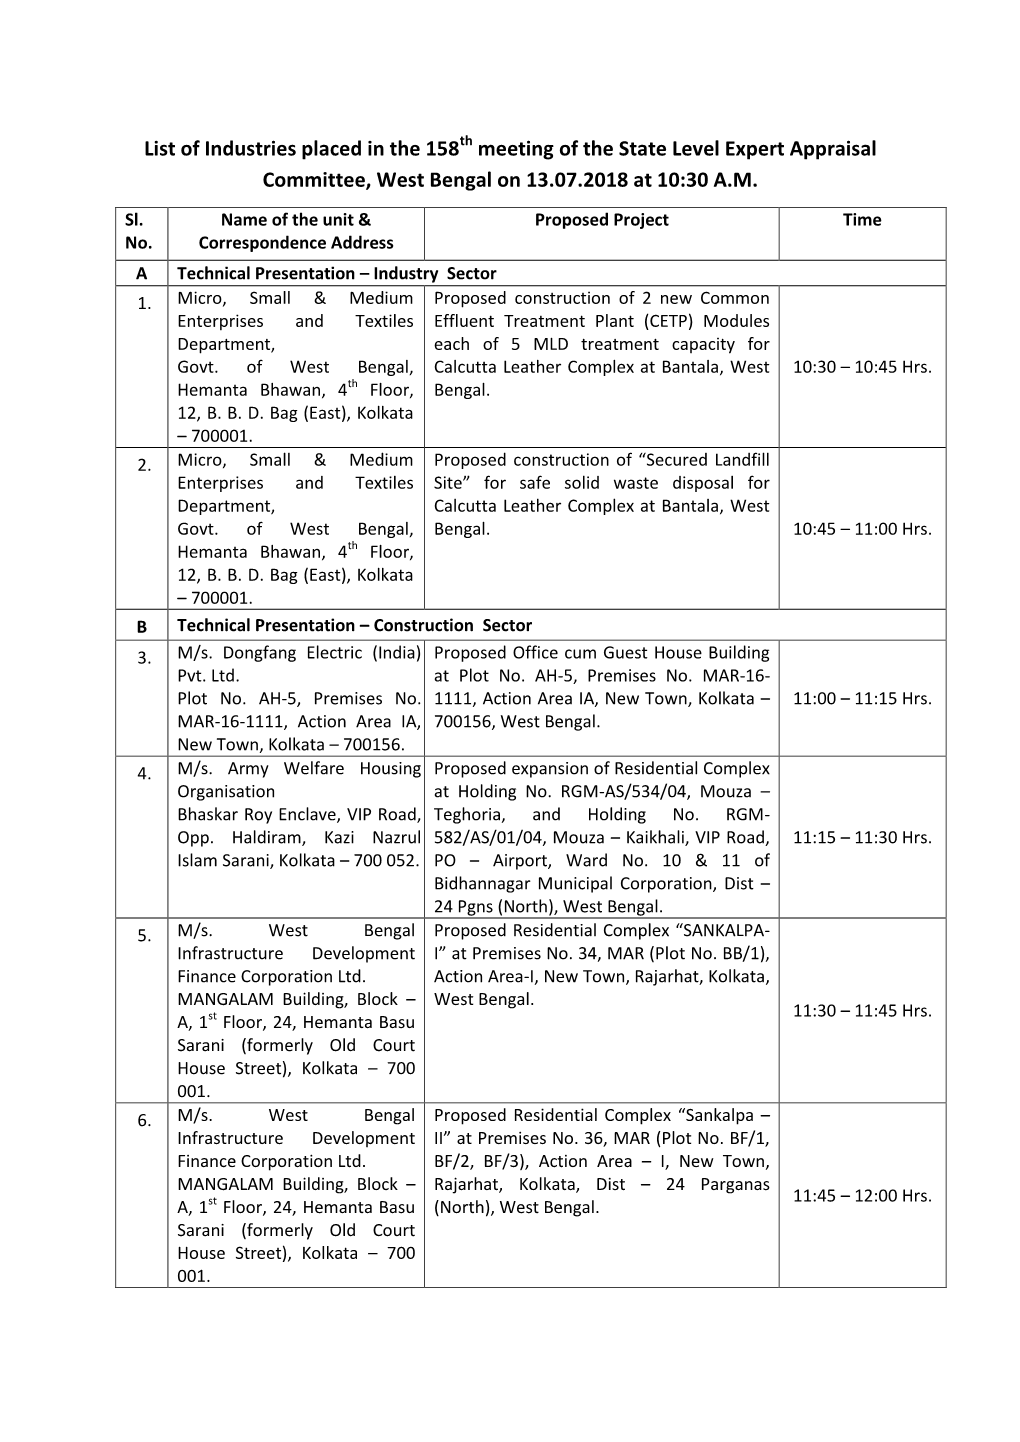 List of Industries Placed in the 158 Meeting of the State Level Expert